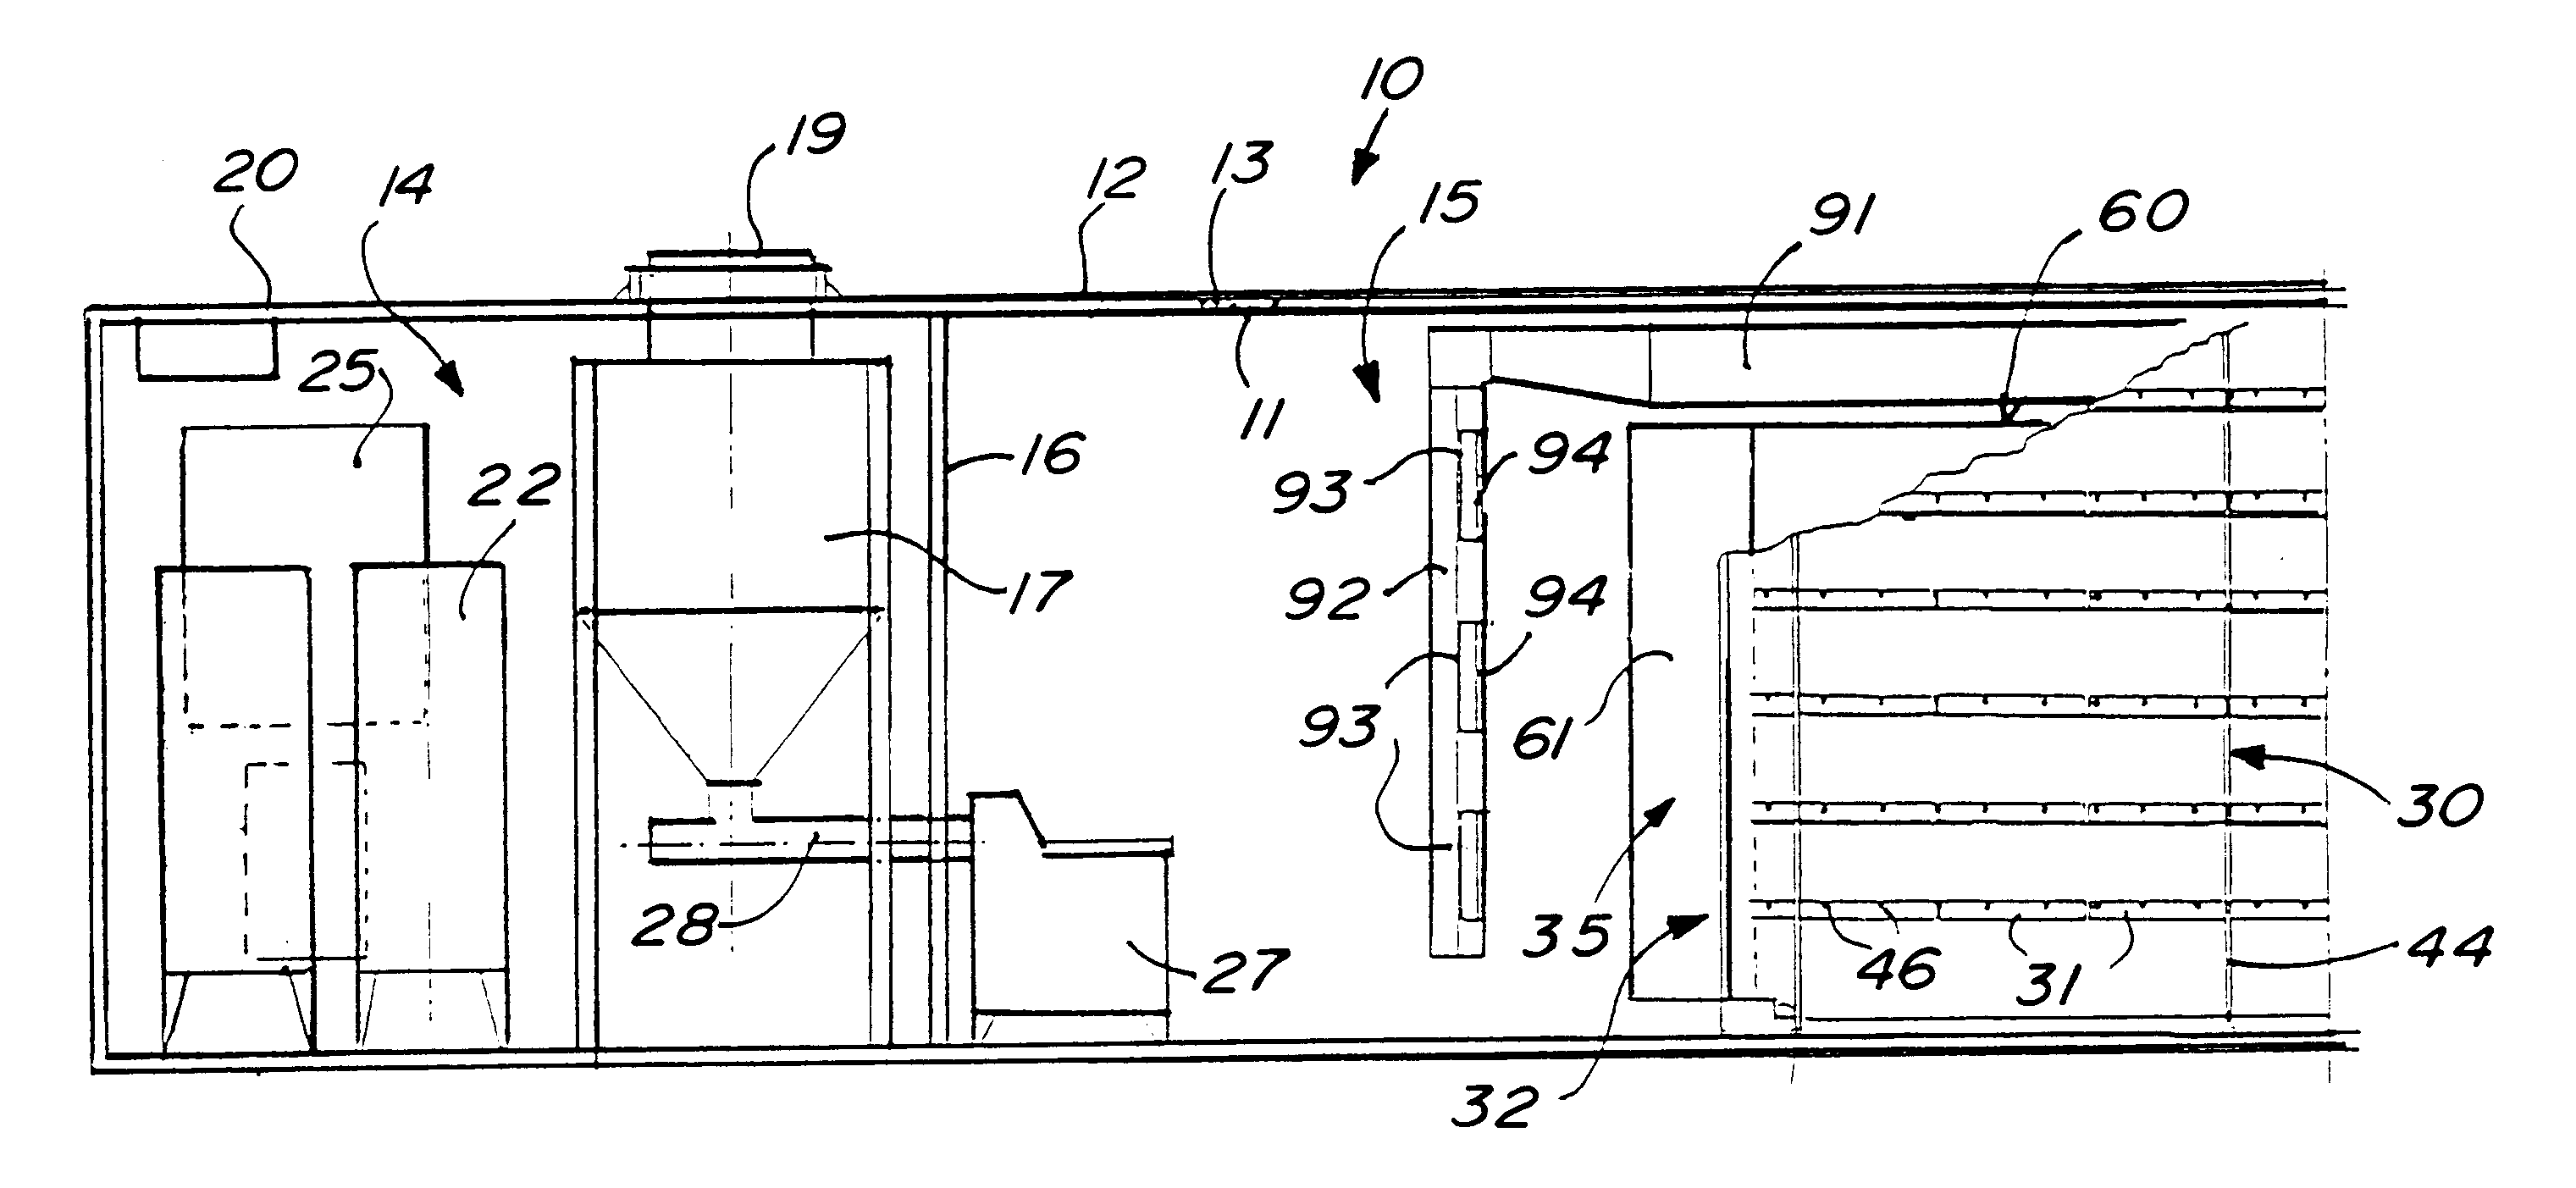 Hydroponic growing enclosure and method for the fabrication of animal feed grass from seed